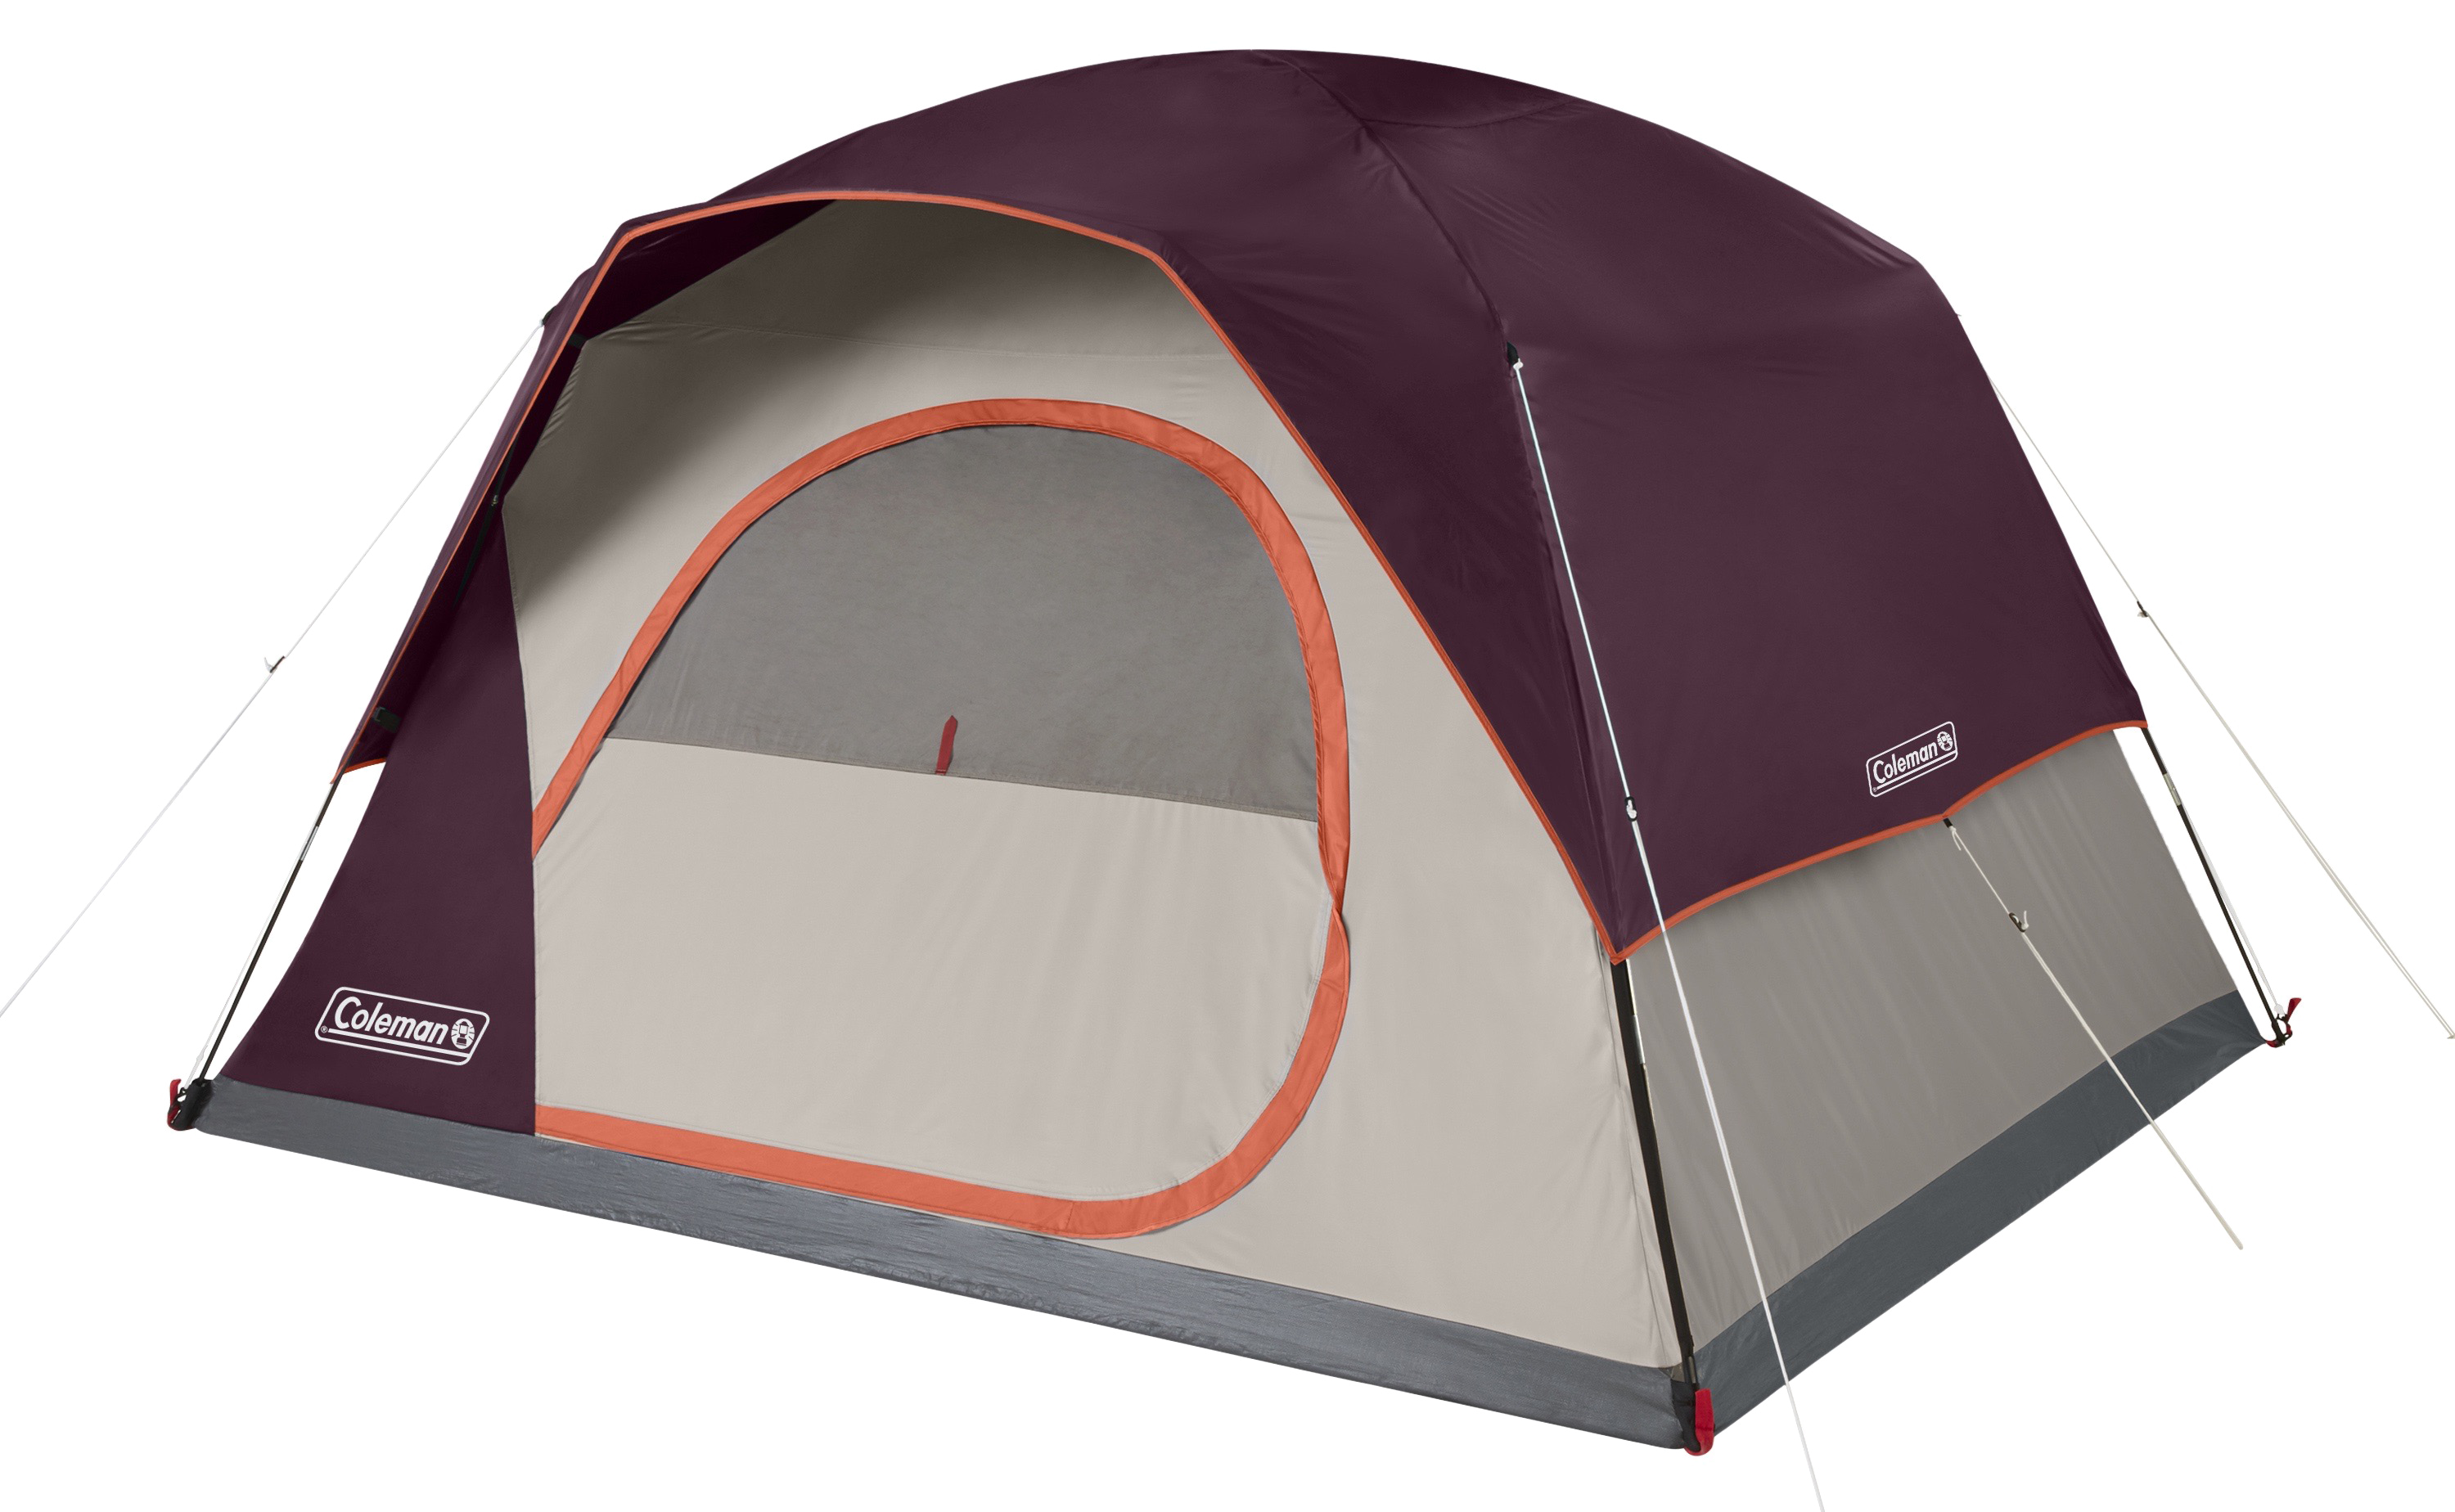 Maroon 6-Person Skydome Coleman Tent with Full Color Transfer.